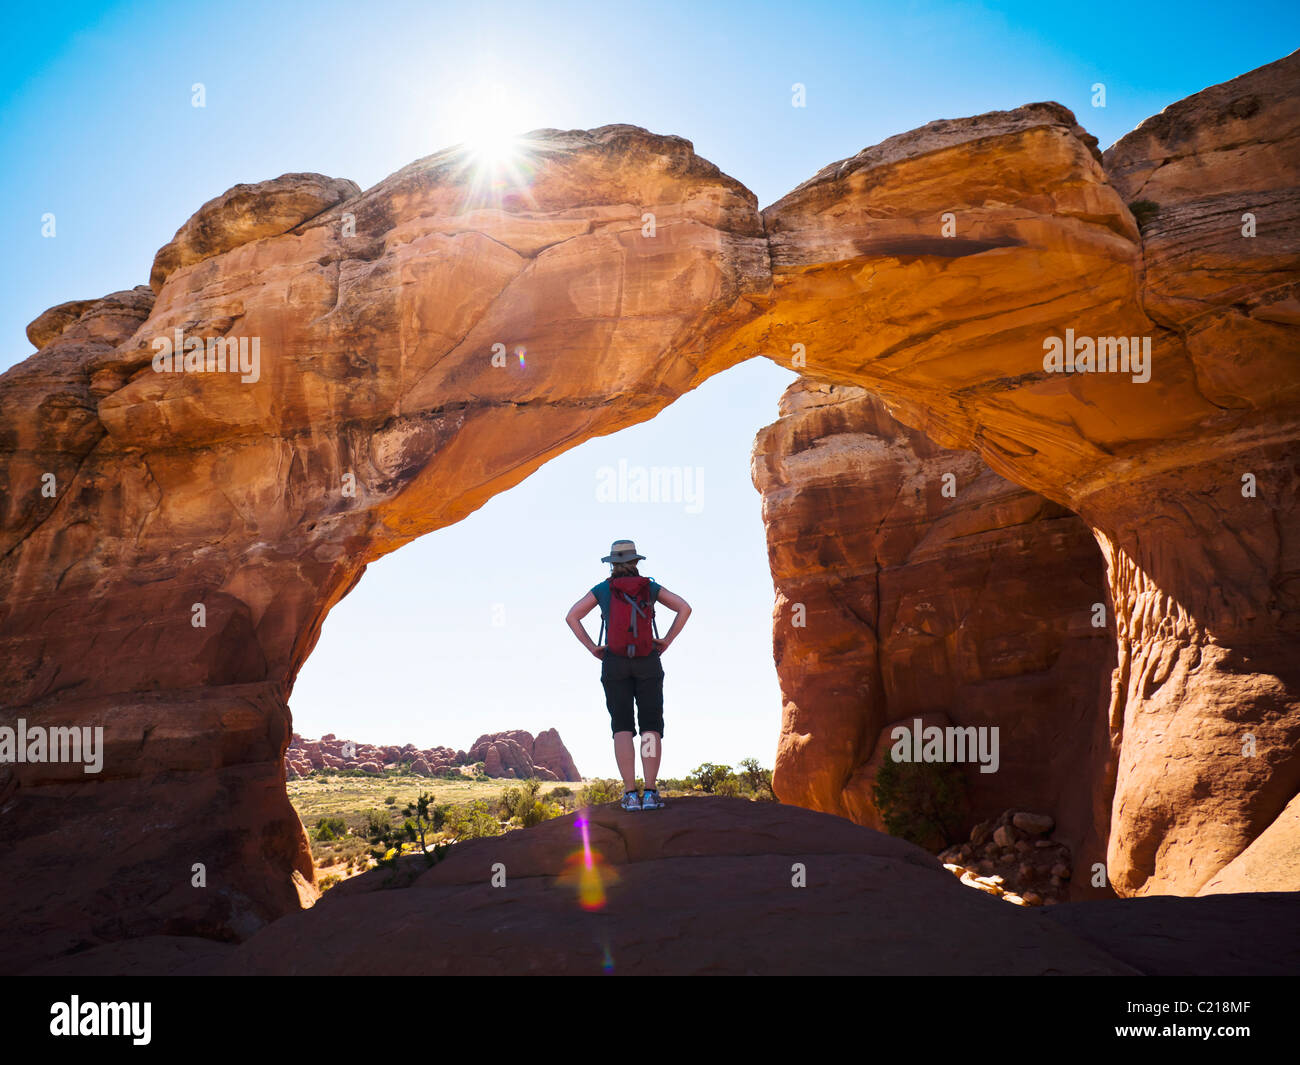 A woman hiker stands under Broken Arch in Arches National Park, Utah, USA. Stock Photo